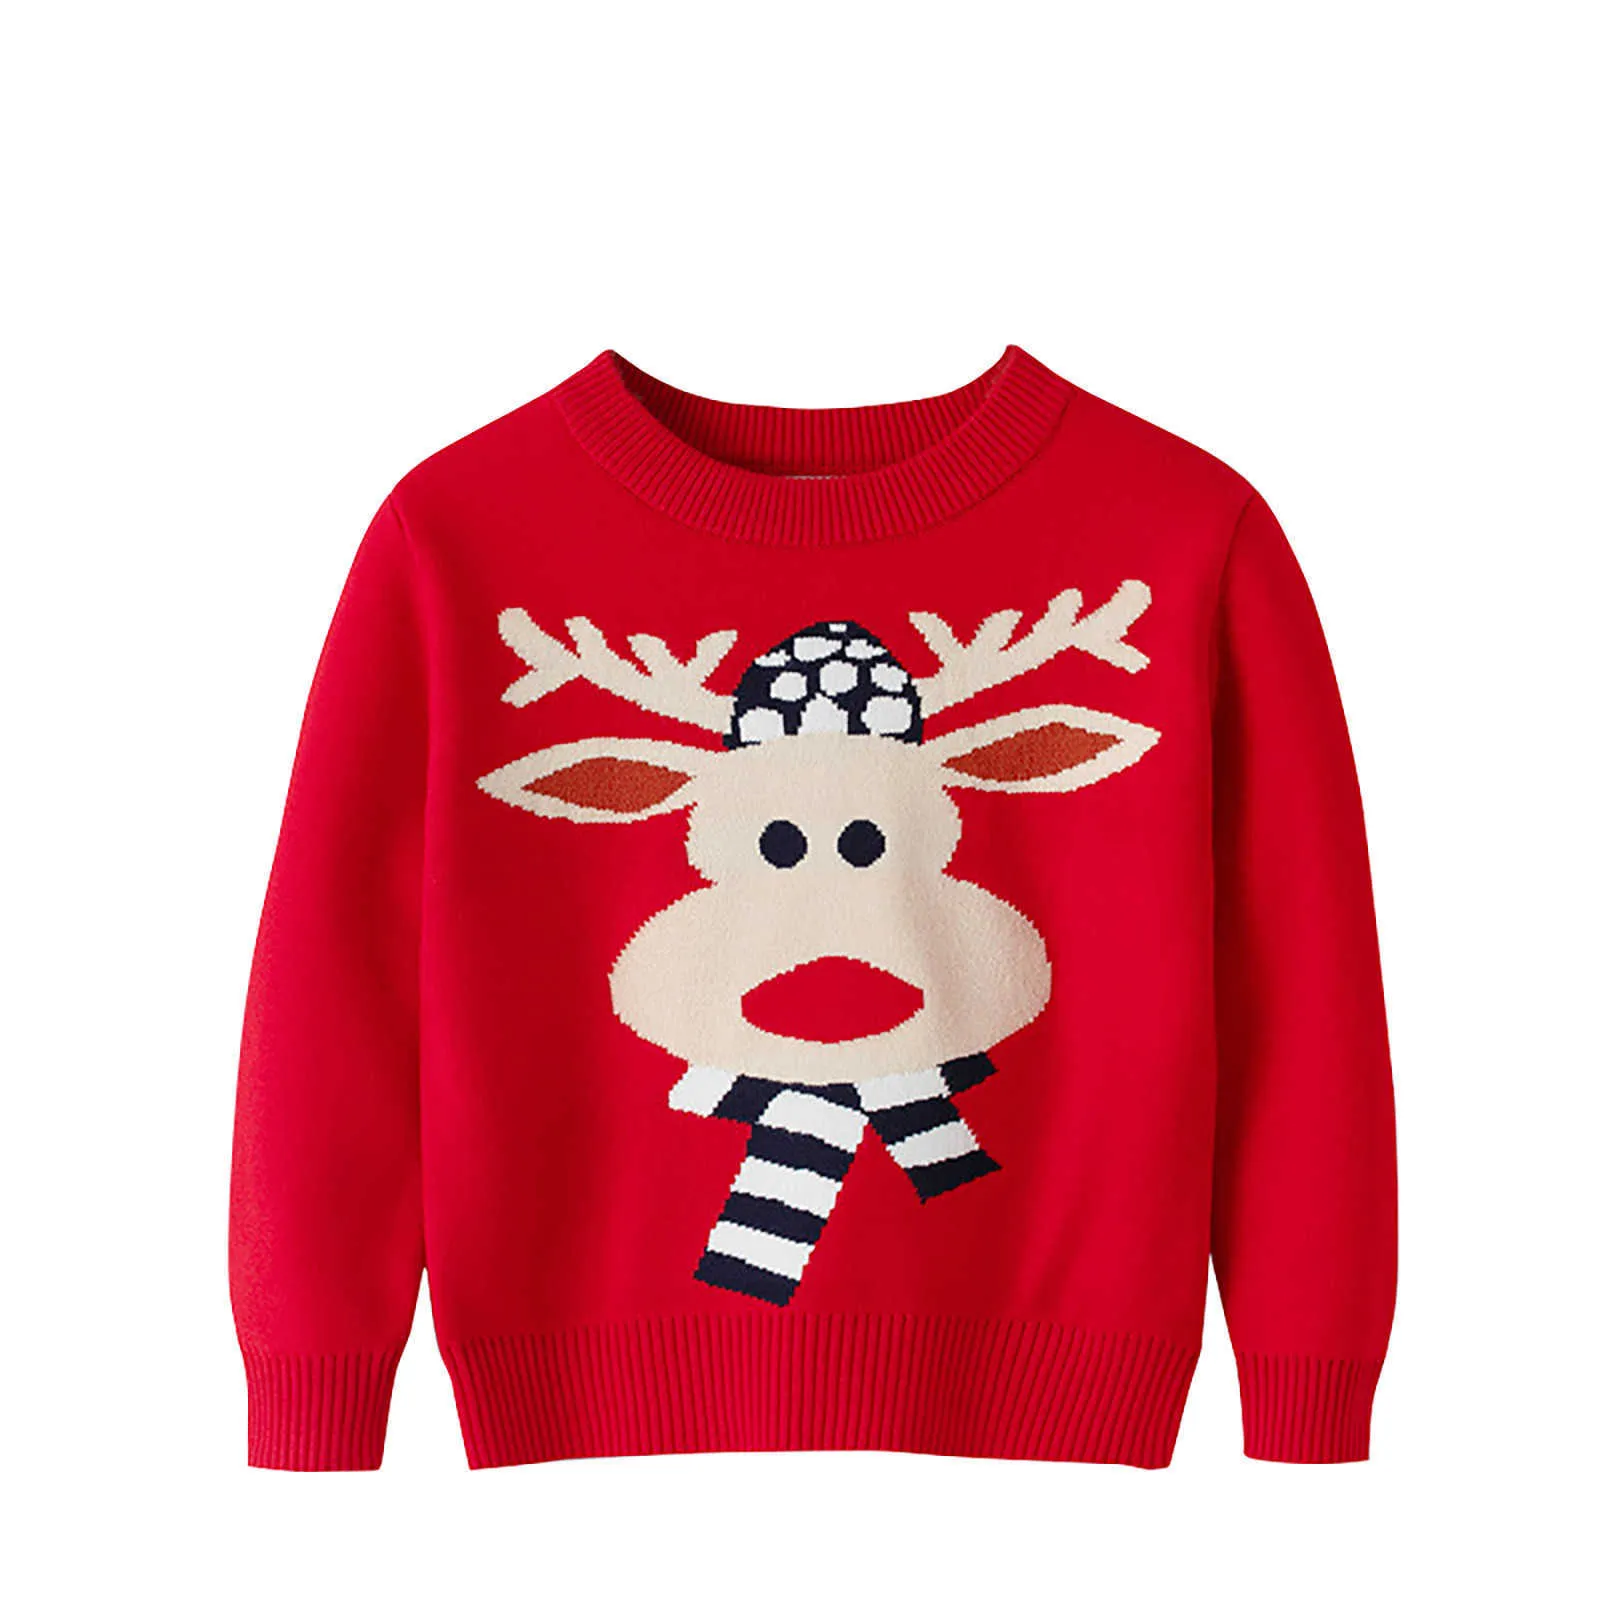 Toddler Youth Teen Boys Girls Christmas Cartoon Knit Print Sweater Knitwear New 2021 Baby Sweater For Girl Cartoon print Y1024